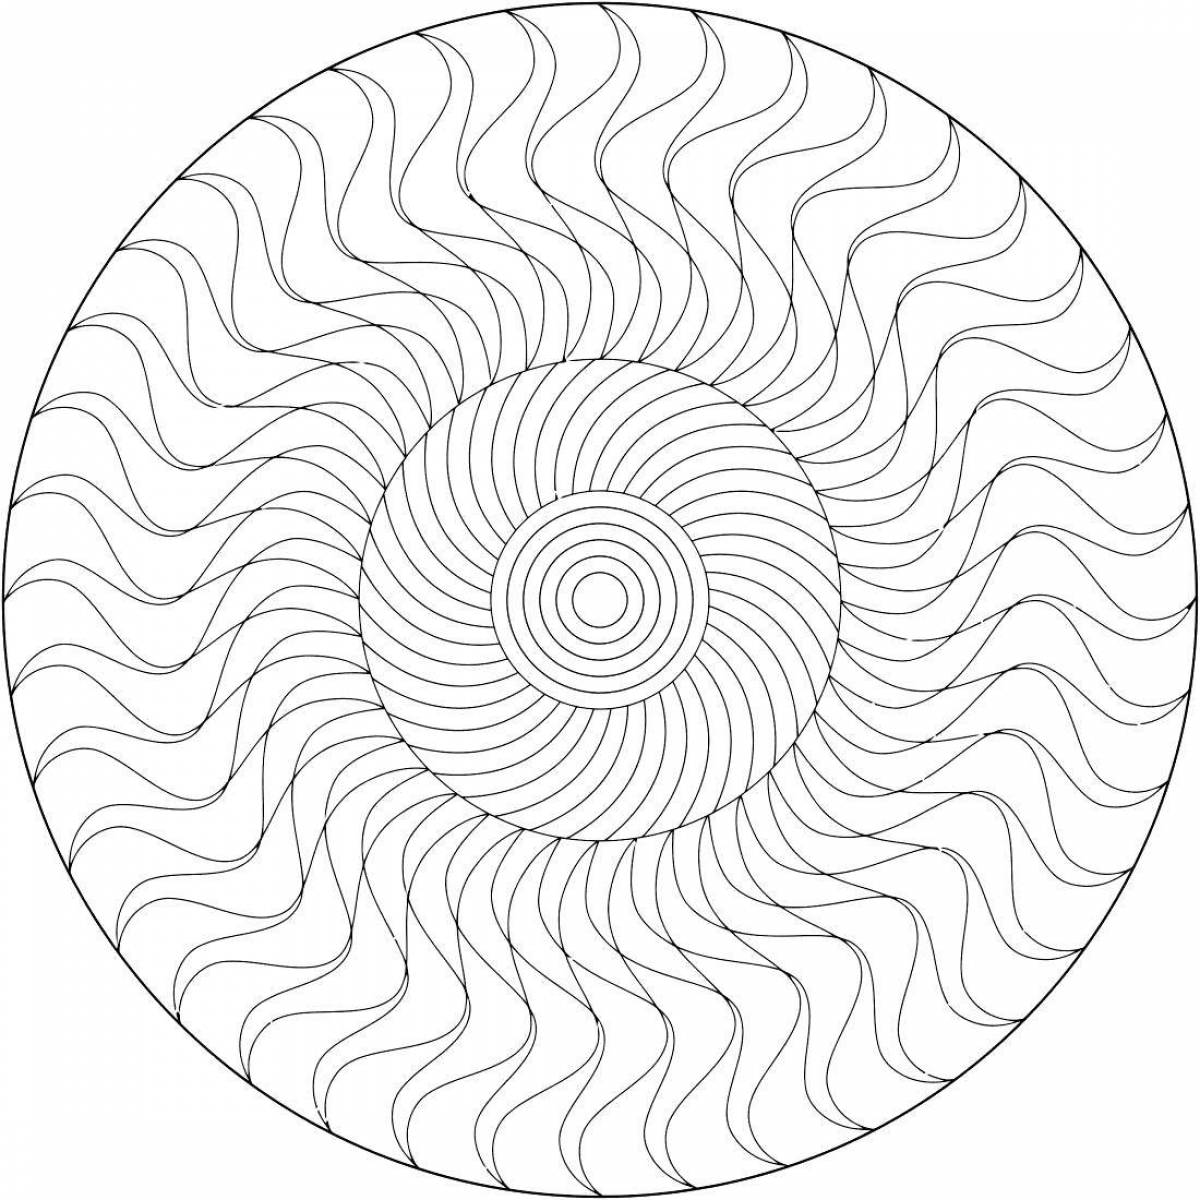 Joyful coloring in a circle in a spiral